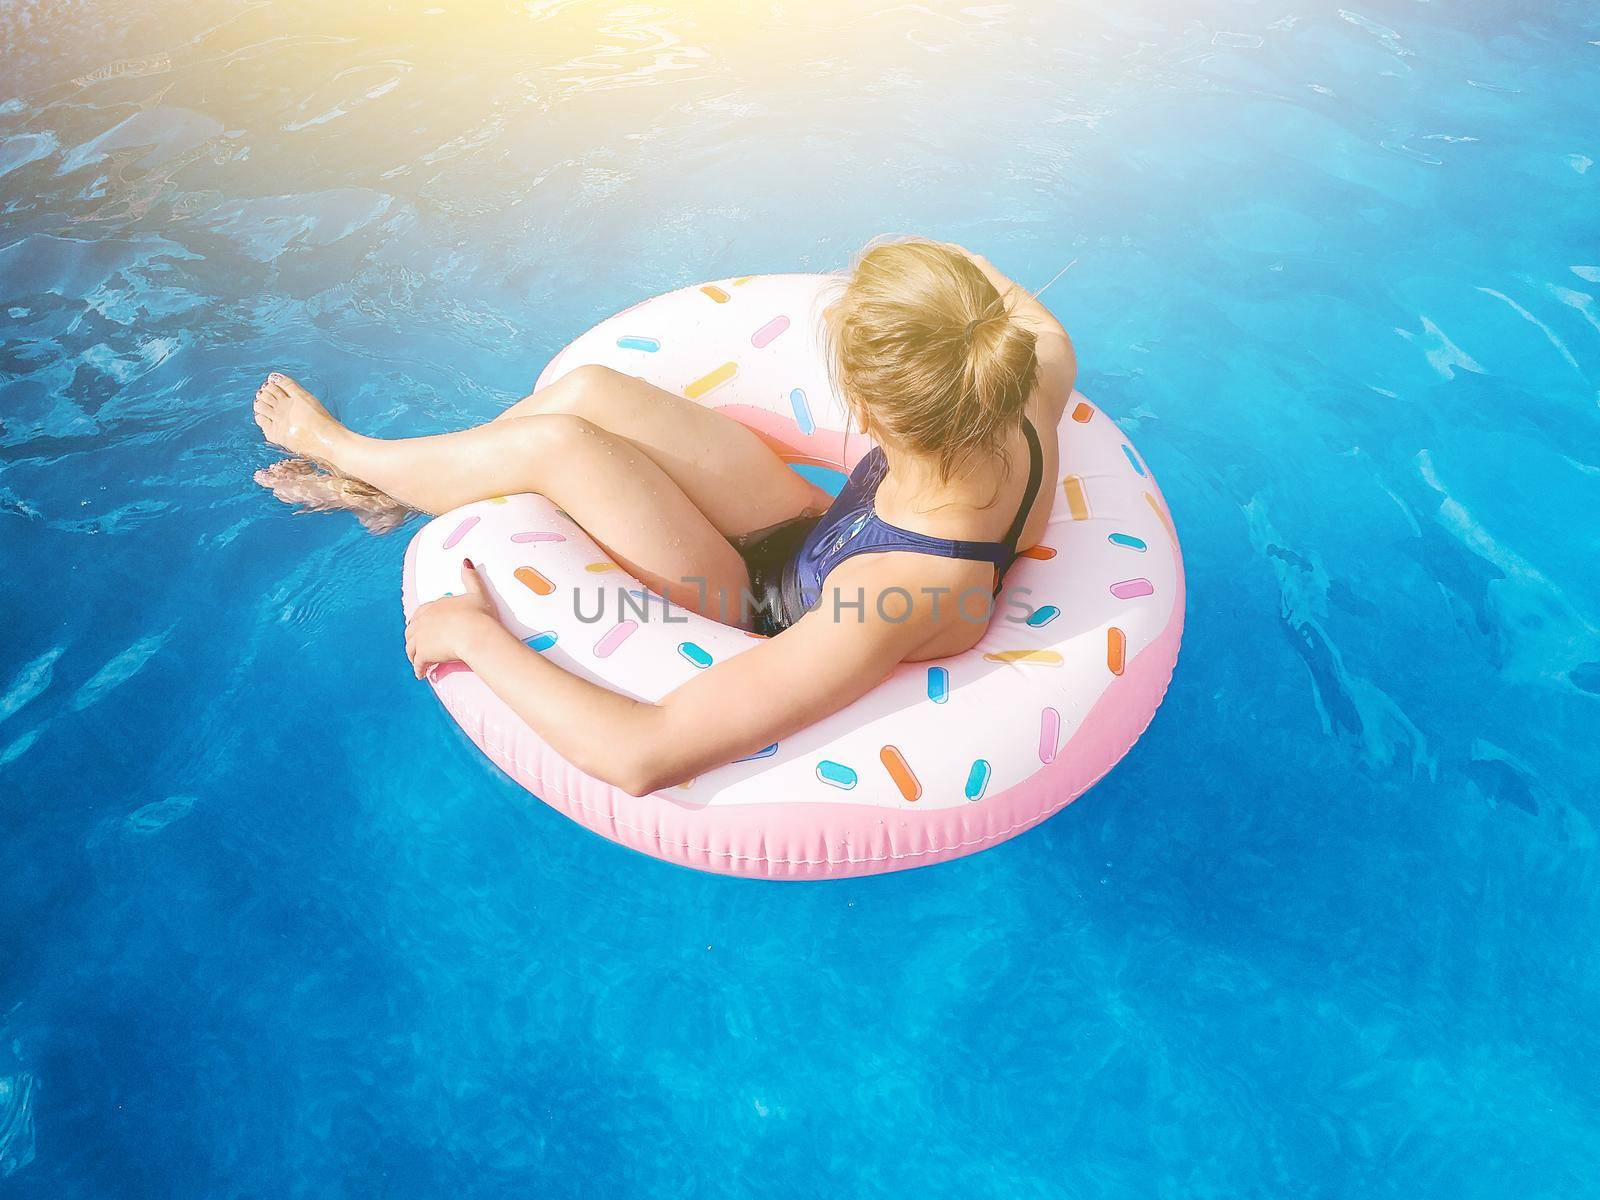 Summer warm vacation. The girl sits on a rubber ring in the form of a donut in a blue pool. Time to relax on an air mattress. Having fun in the water for a family vacation. Sea resort. by Alla_Morozova93